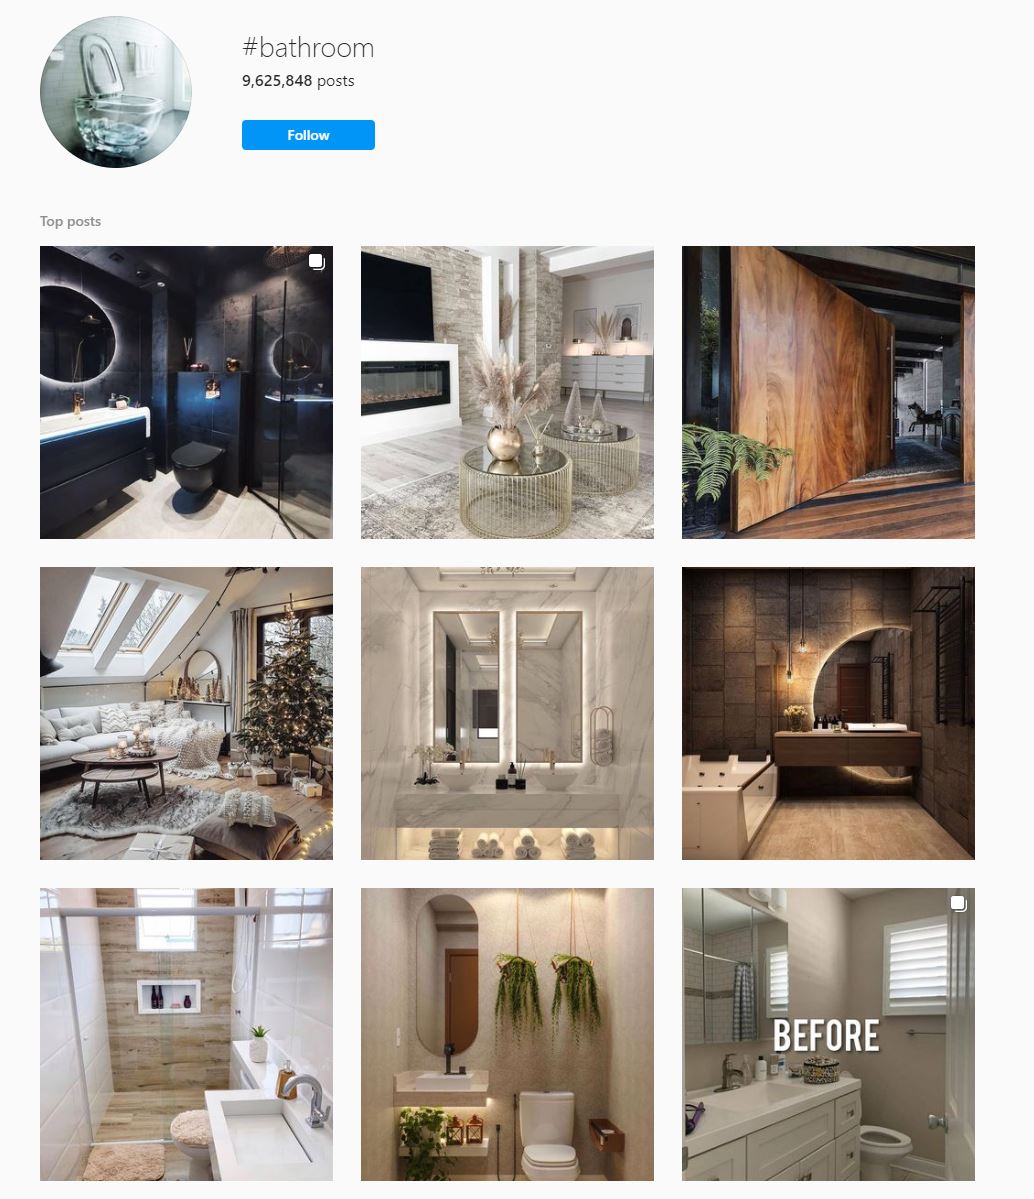 Screenshot of images on Instagram under the bathroom hashtag